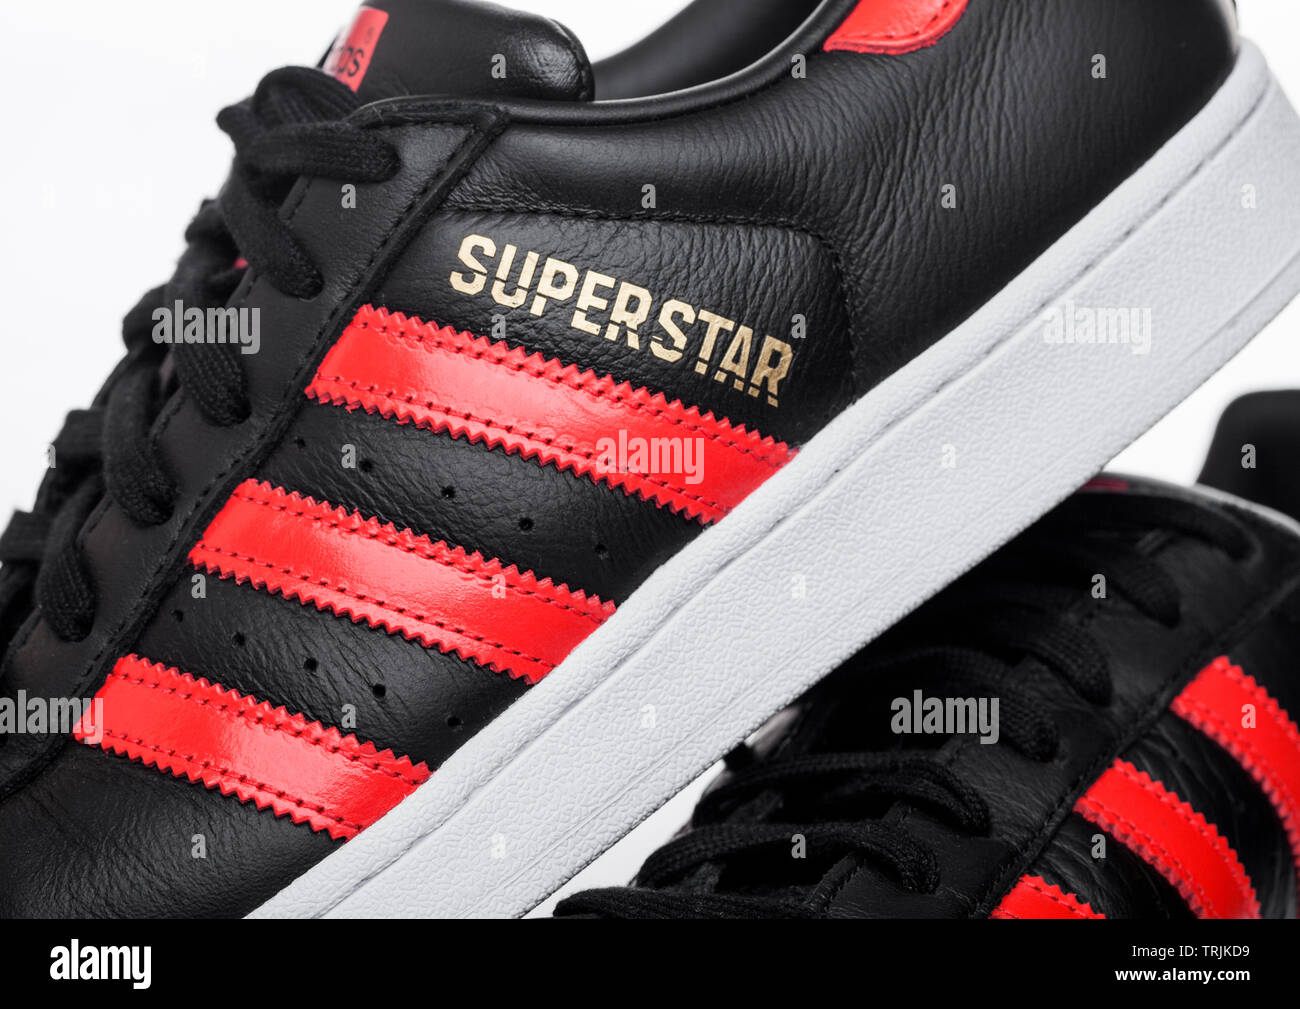 LONDON, UK - JUNE 05, Adidas Originals Superstar black shoes with red stripes white background Stock Photo - Alamy